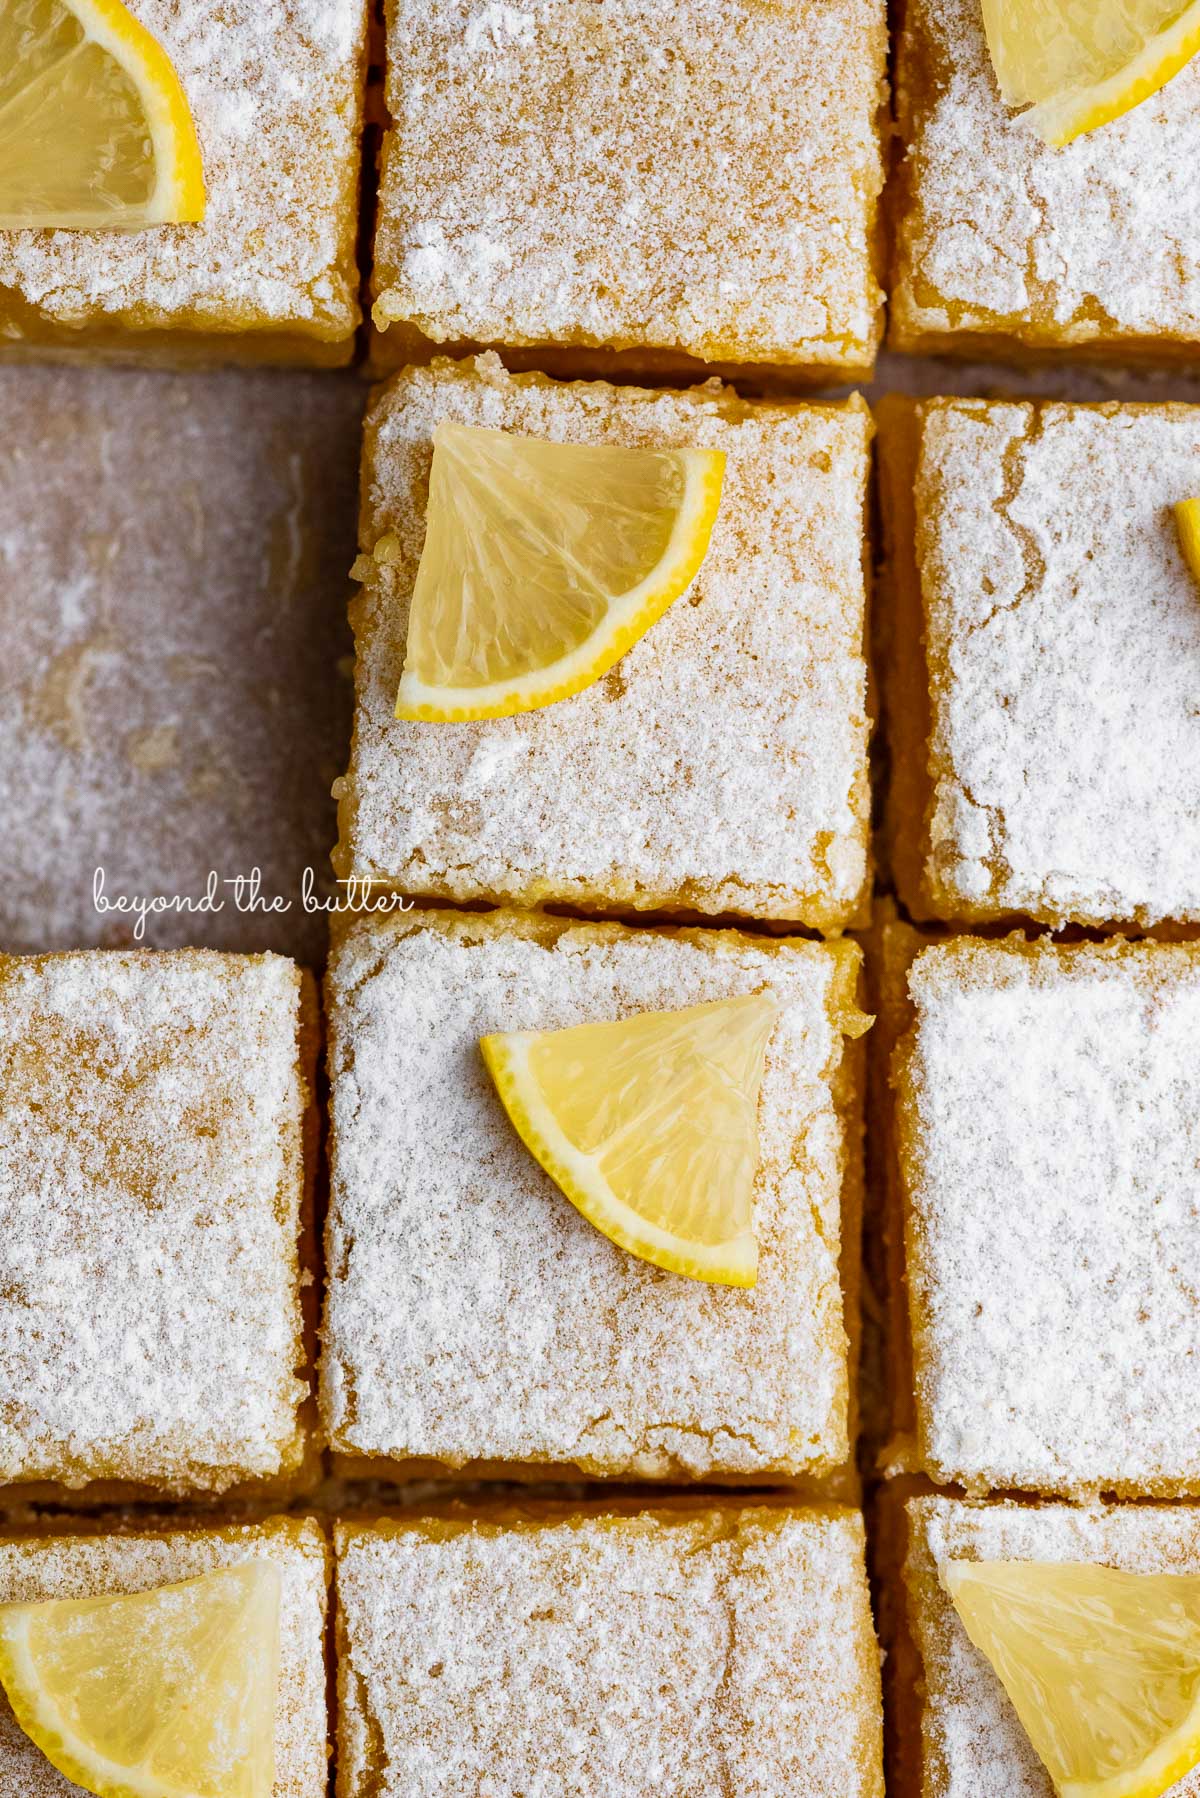 Tart and tangy lemon bars on parchment paper | © Beyond the Butter®